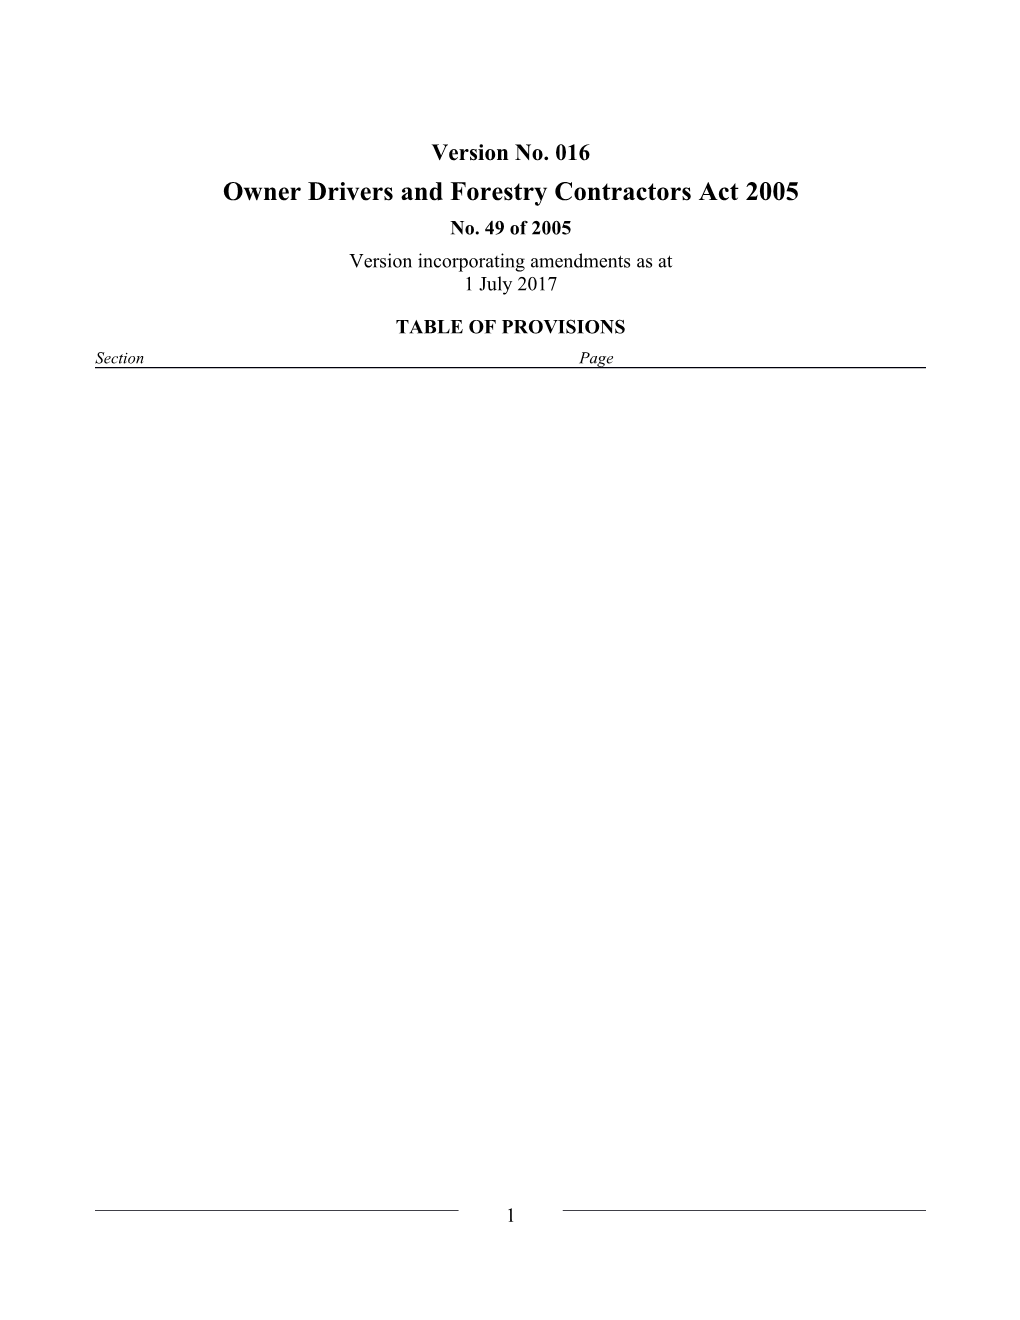 Owner Drivers and Forestry Contractors Act 2005